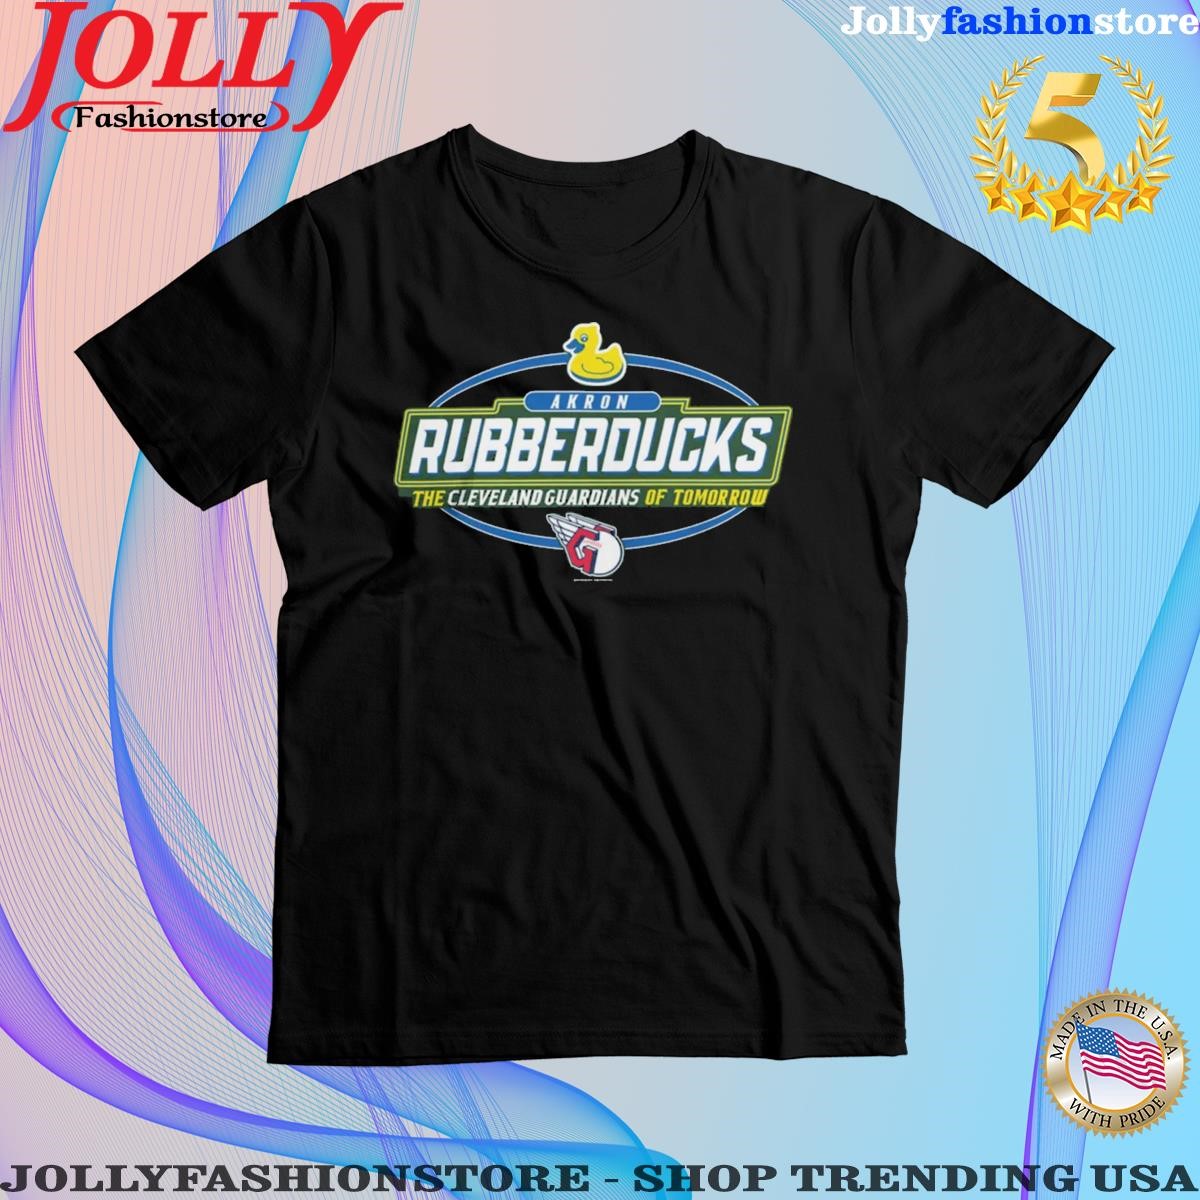 Akron RubberDucks The Cleveland Guardians Of Tomorrow Shirt